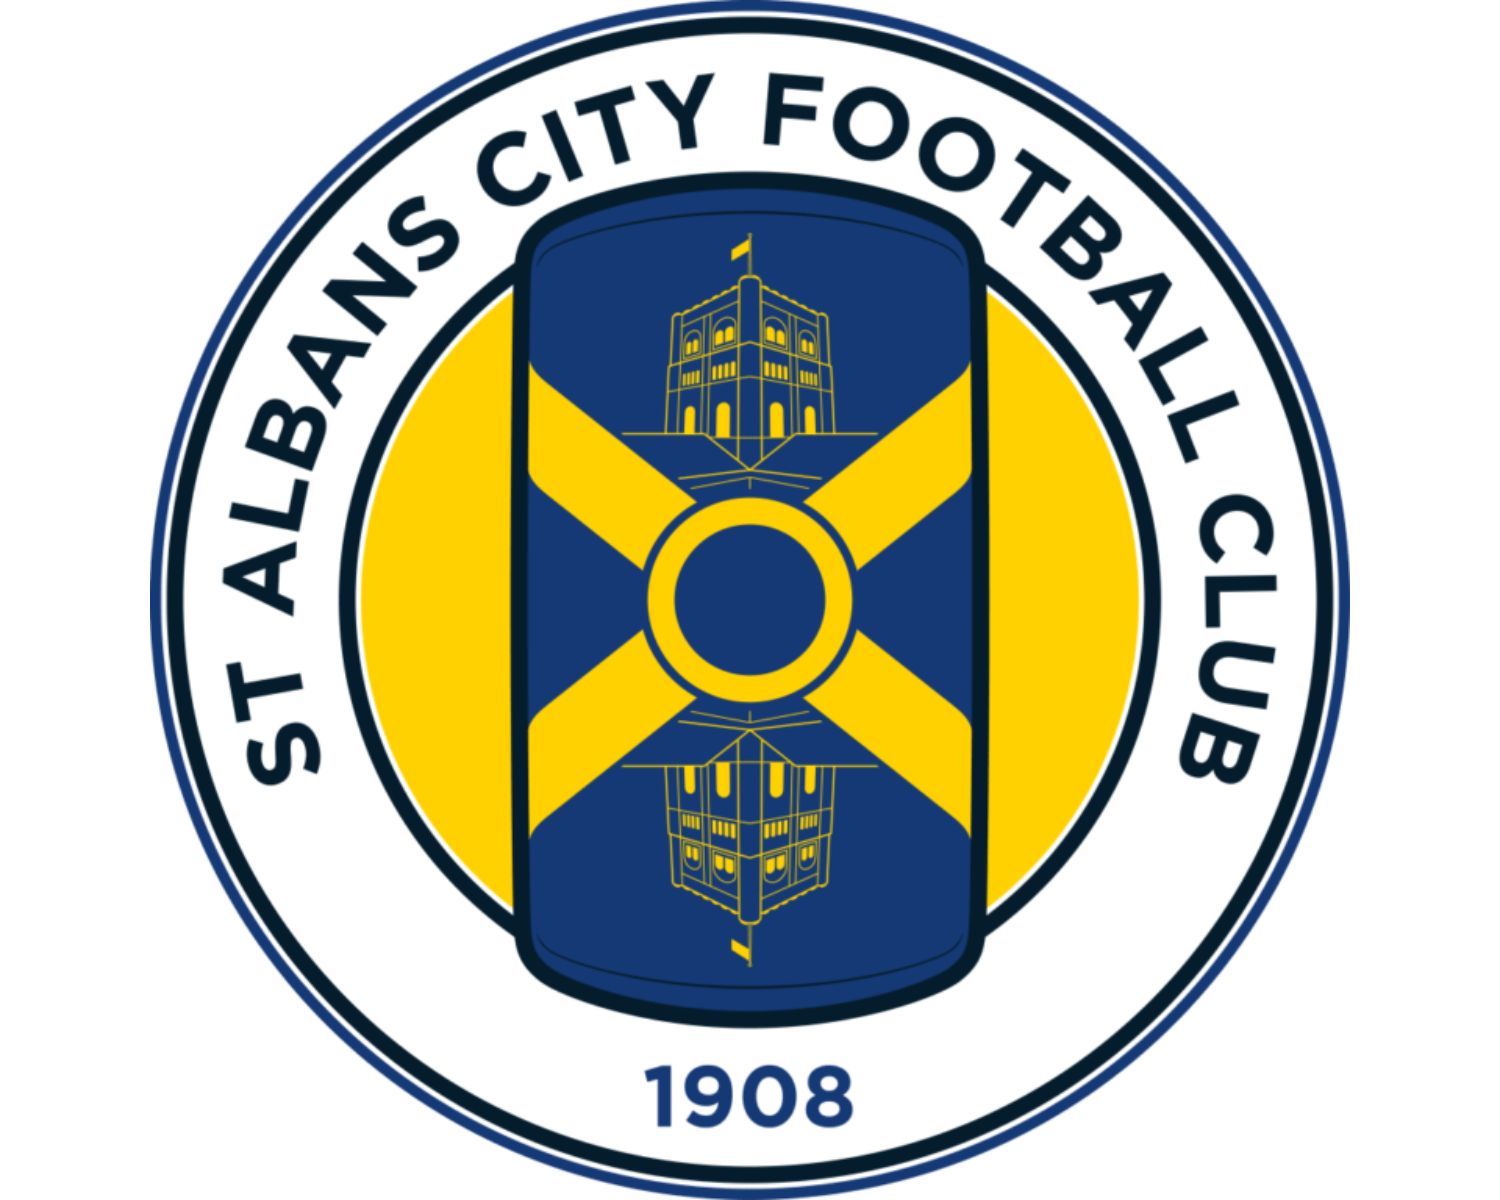 st-albans-city-fc-22-football-club-facts